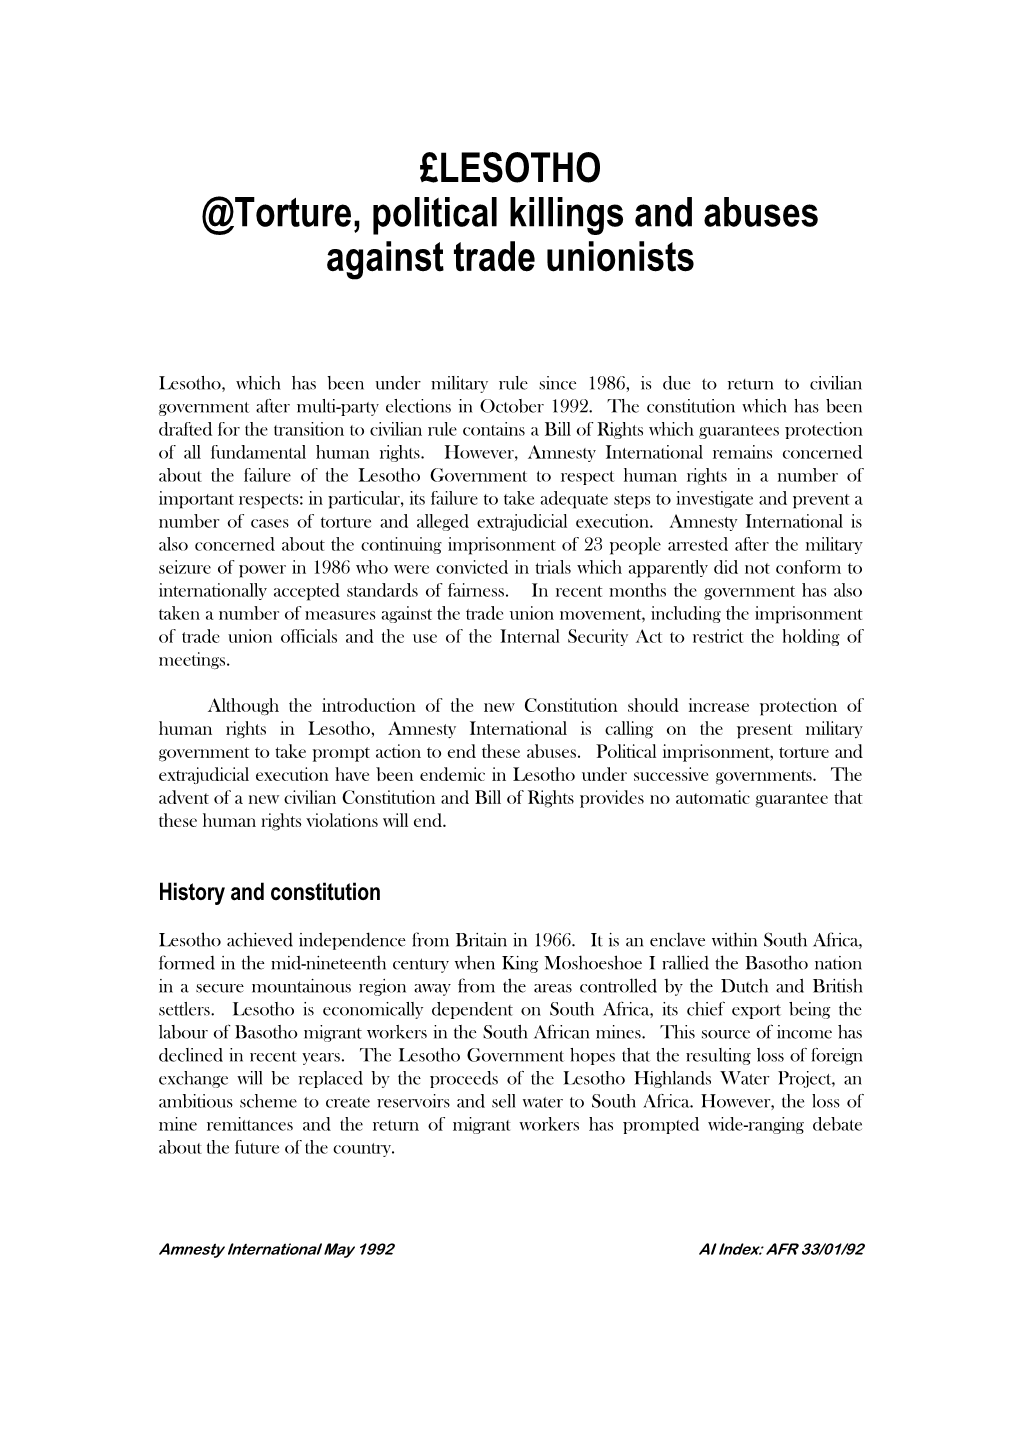 LESOTHO @Torture, Political Killings and Abuses Against Trade Unionists